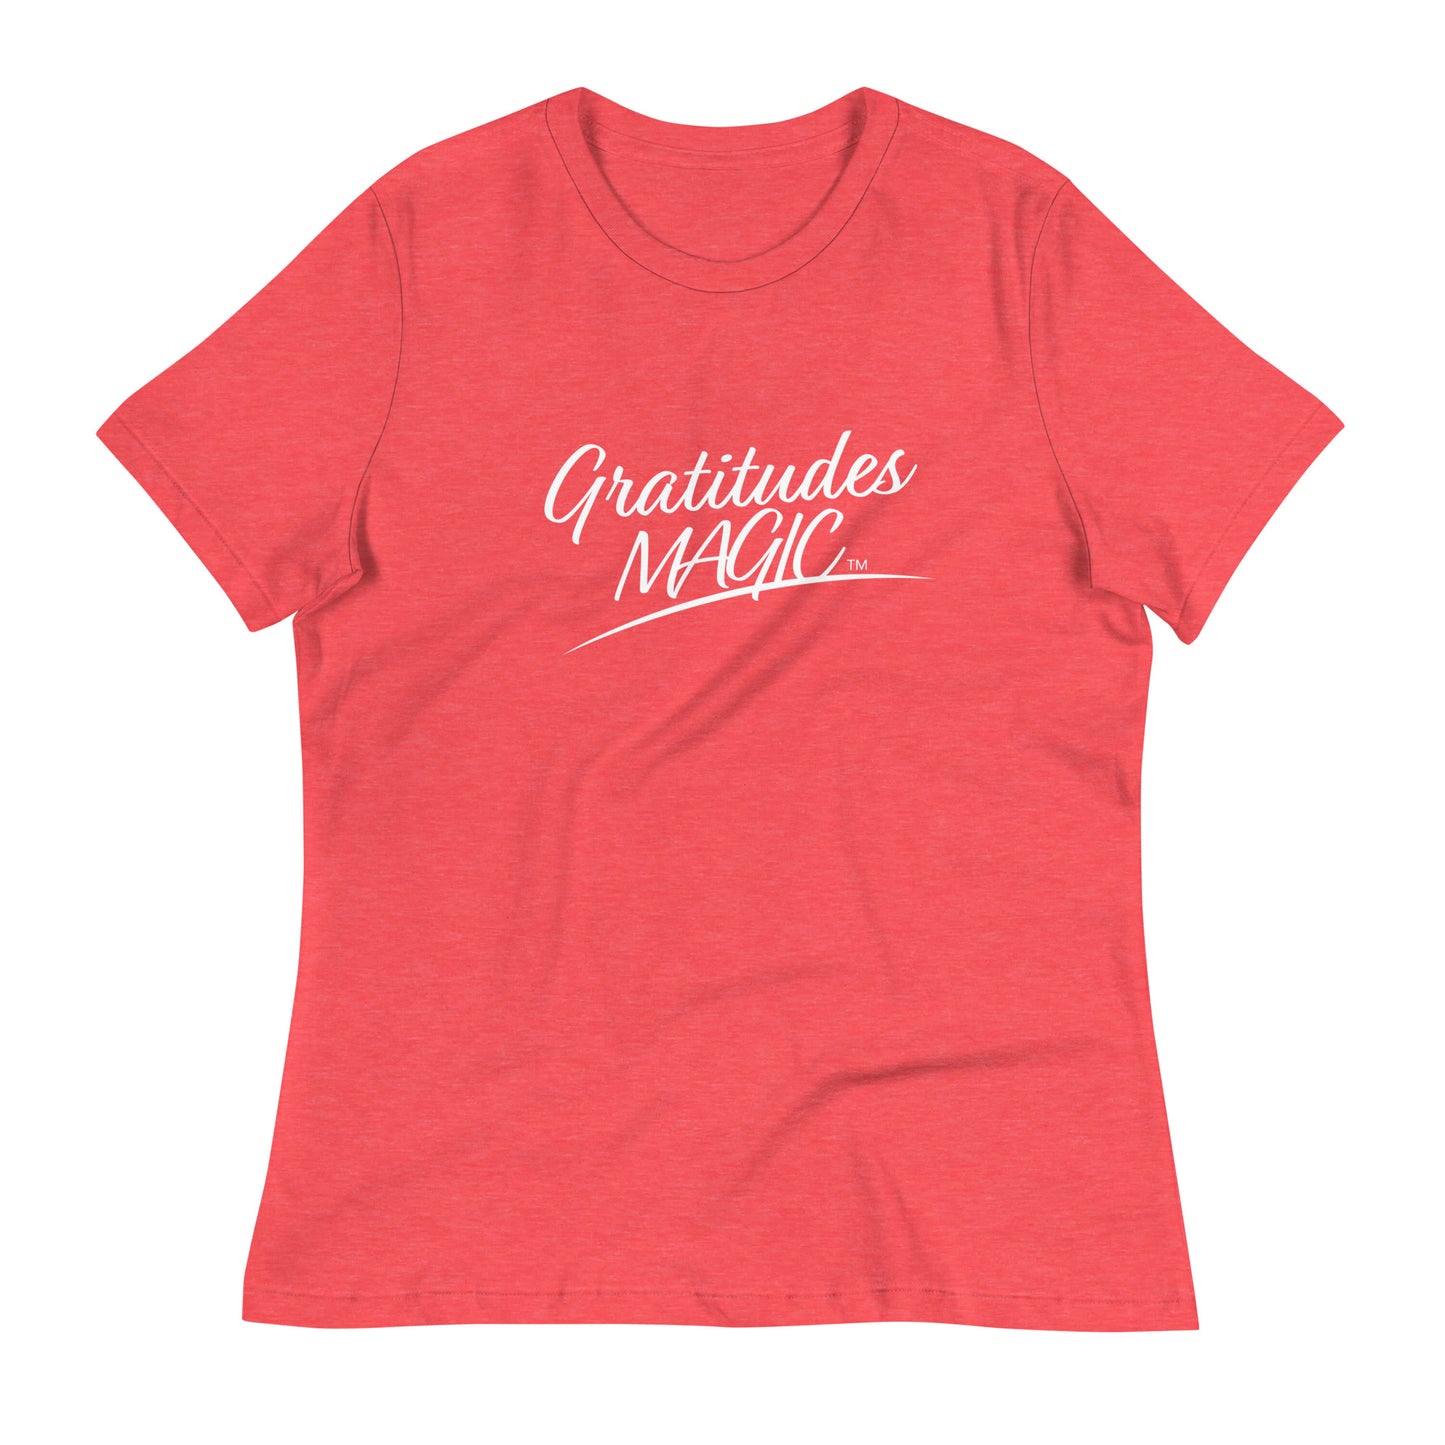 Affordable women's tees- Heather red